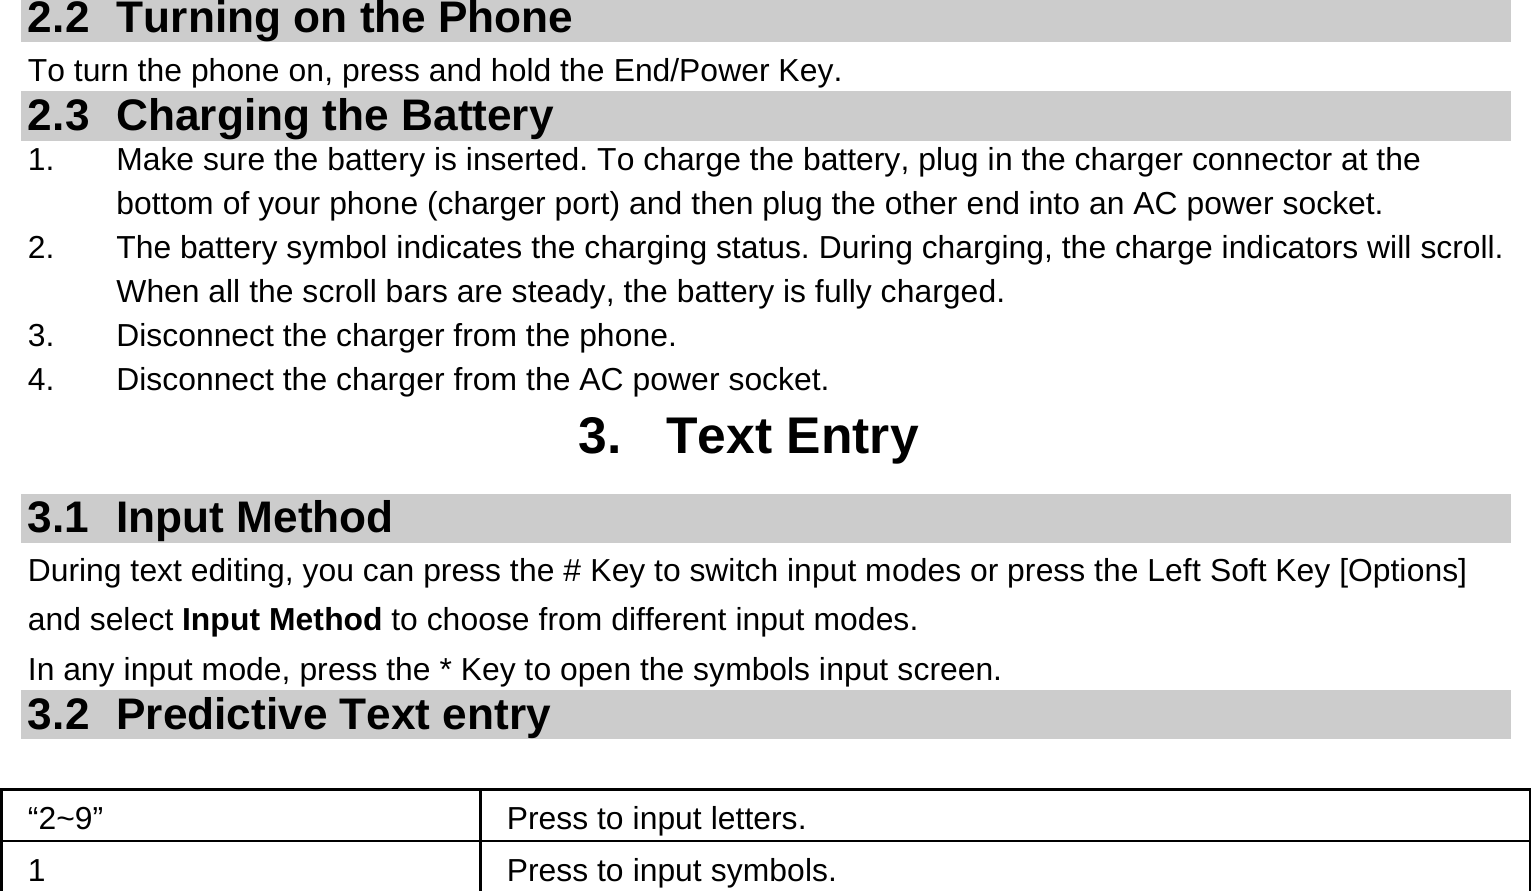  2.2  Turning on the Phone   To turn the phone on, press and hold the End/Power Key.   2.3 Charging the Battery 1.  Make sure the battery is inserted. To charge the battery, plug in the charger connector at the bottom of your phone (charger port) and then plug the other end into an AC power socket. 2.  The battery symbol indicates the charging status. During charging, the charge indicators will scroll. When all the scroll bars are steady, the battery is fully charged.   3.  Disconnect the charger from the phone. 4.  Disconnect the charger from the AC power socket. 3. Text Entry 3.1 Input Method During text editing, you can press the # Key to switch input modes or press the Left Soft Key [Options] and select Input Method to choose from different input modes. In any input mode, press the * Key to open the symbols input screen.   3.2 Predictive Text entry  “2~9”     Press to input letters. 1  Press to input symbols. 